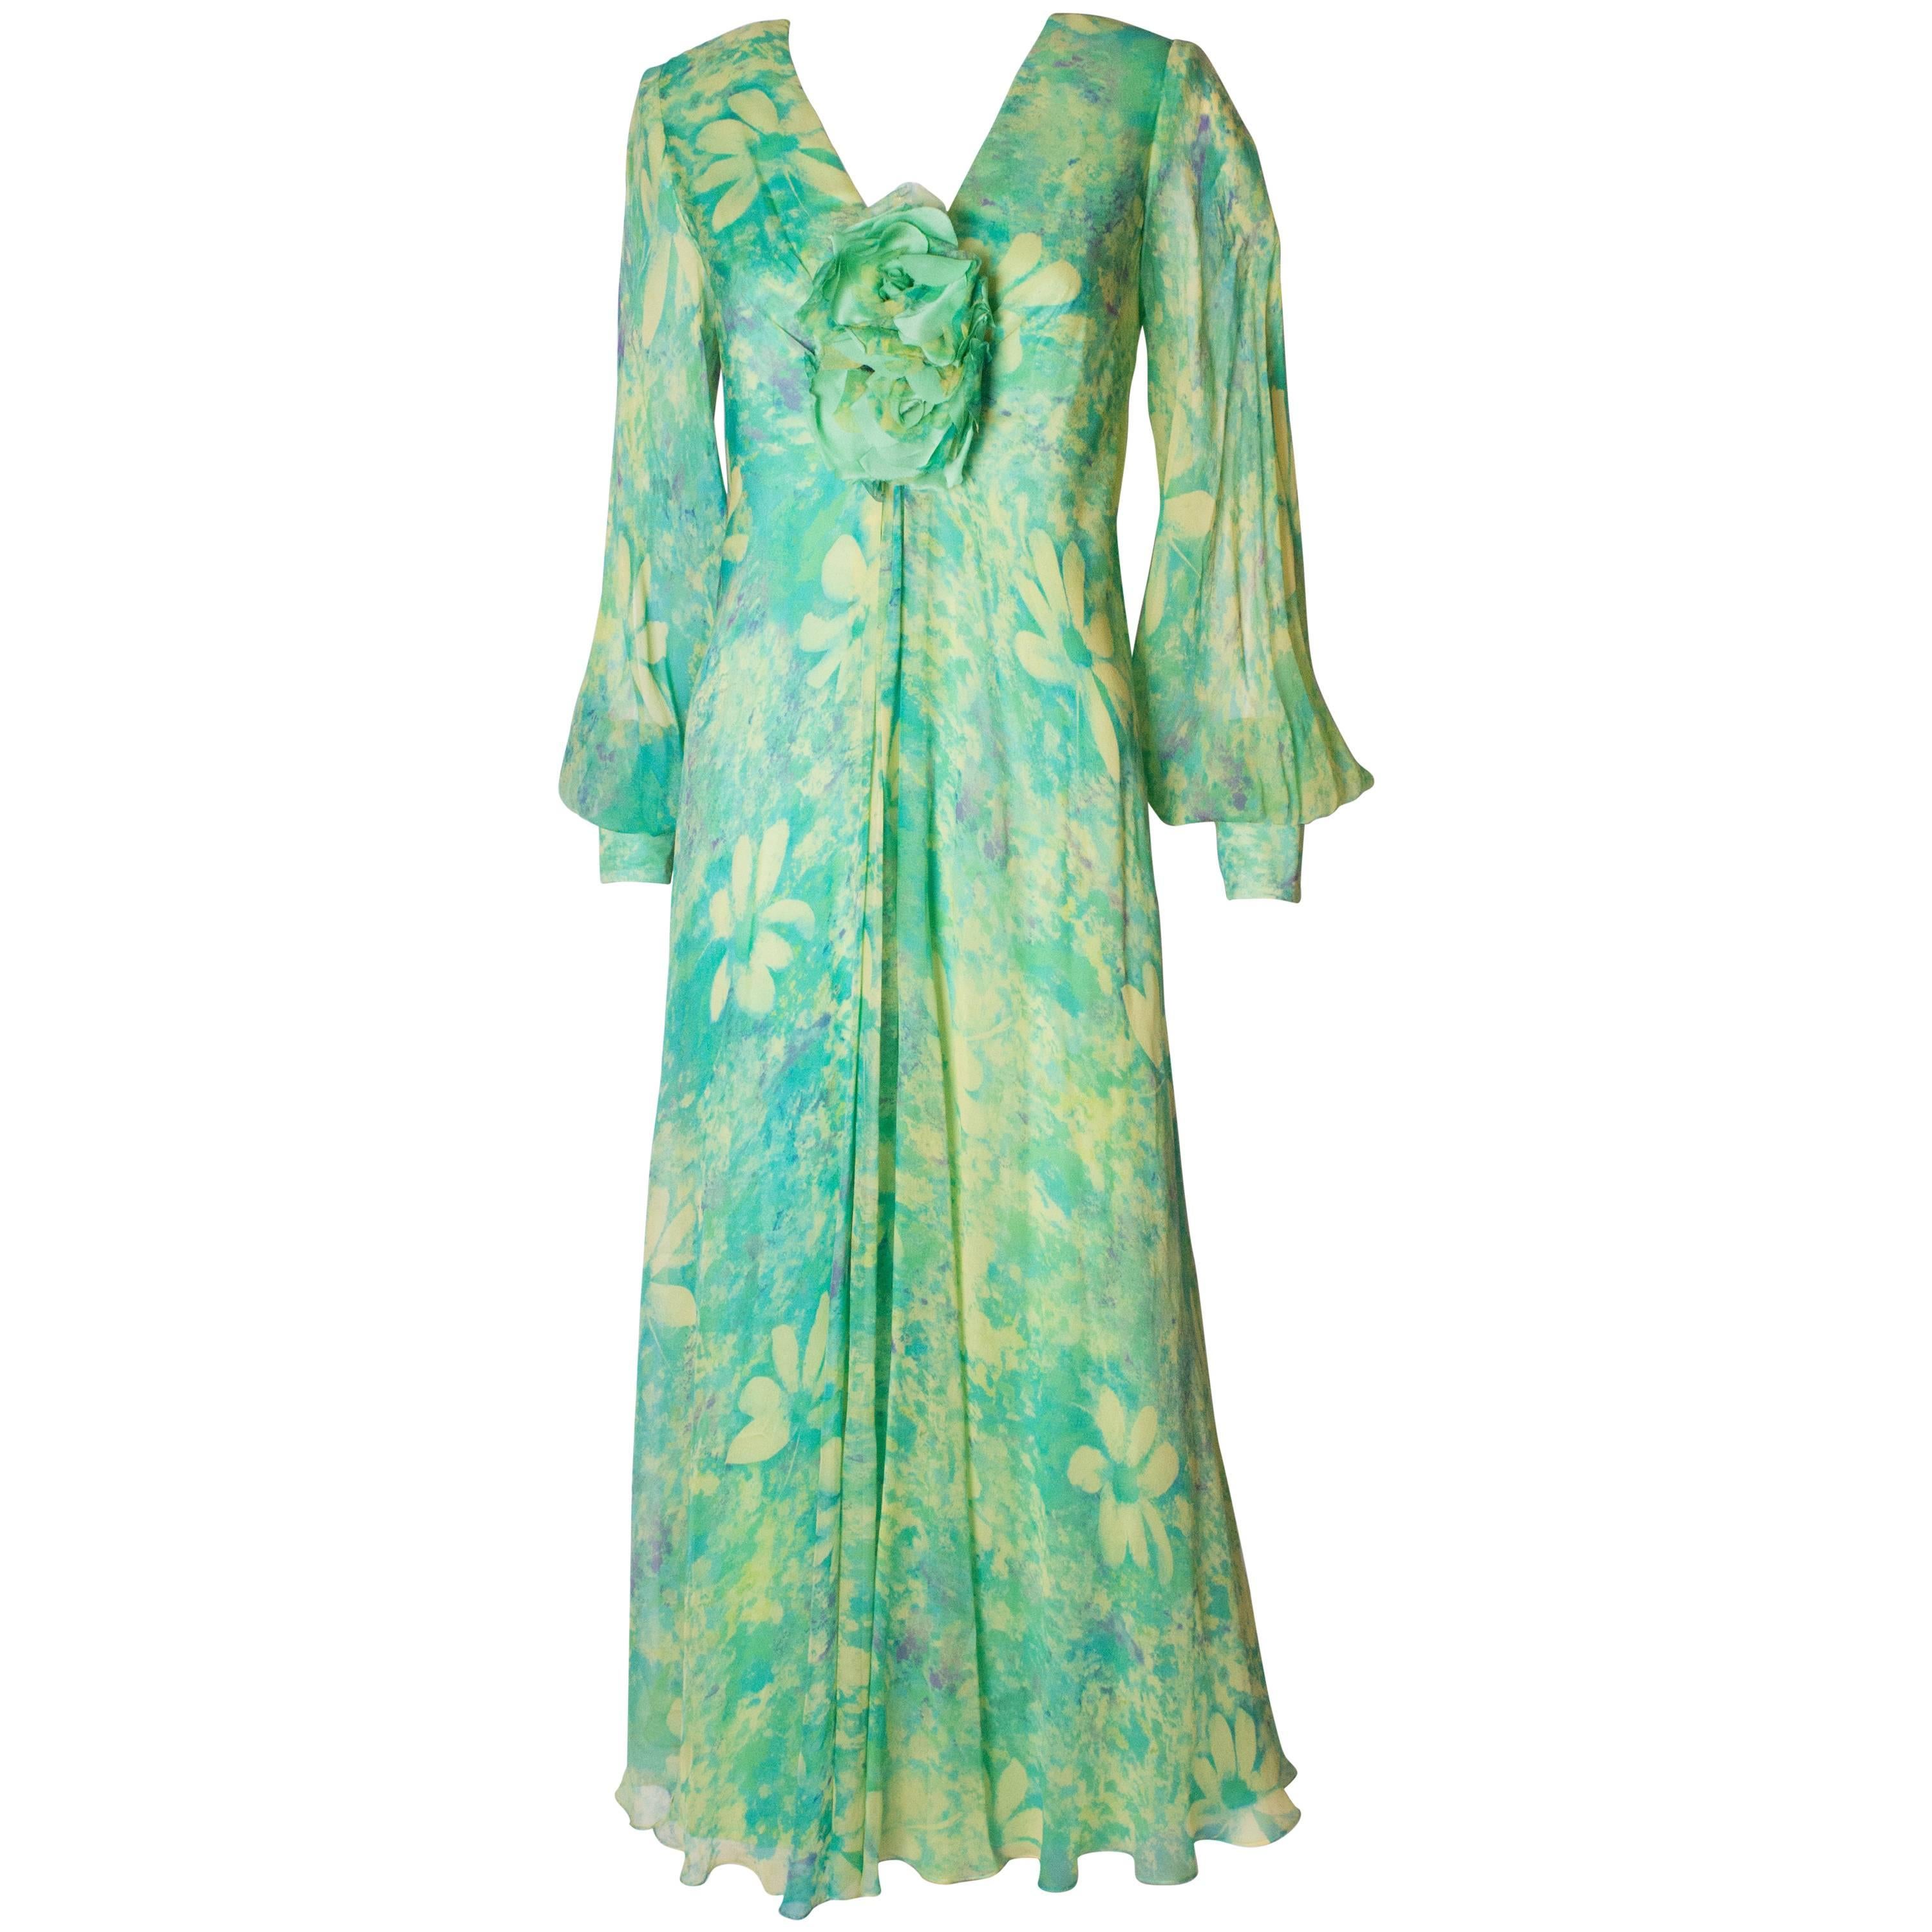 A vintage 1970s green floral print silk dress by Alison Rodger